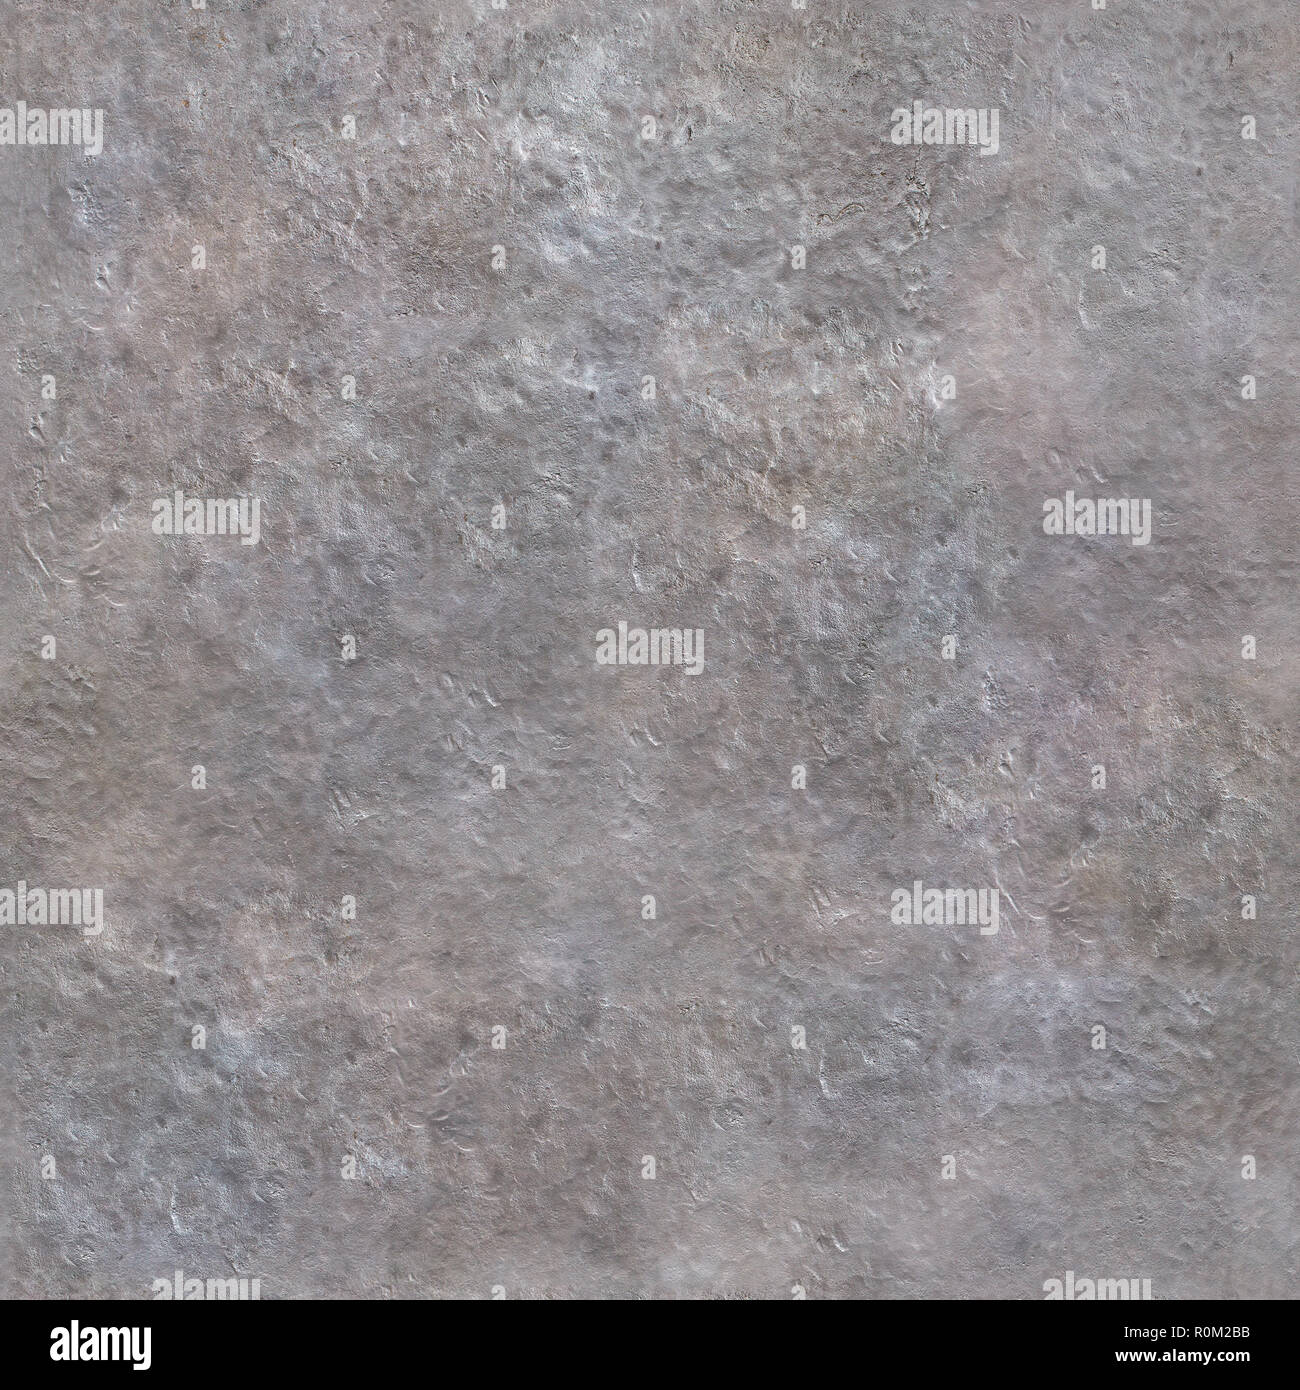 old rustic metal seamless texture Stock Photo